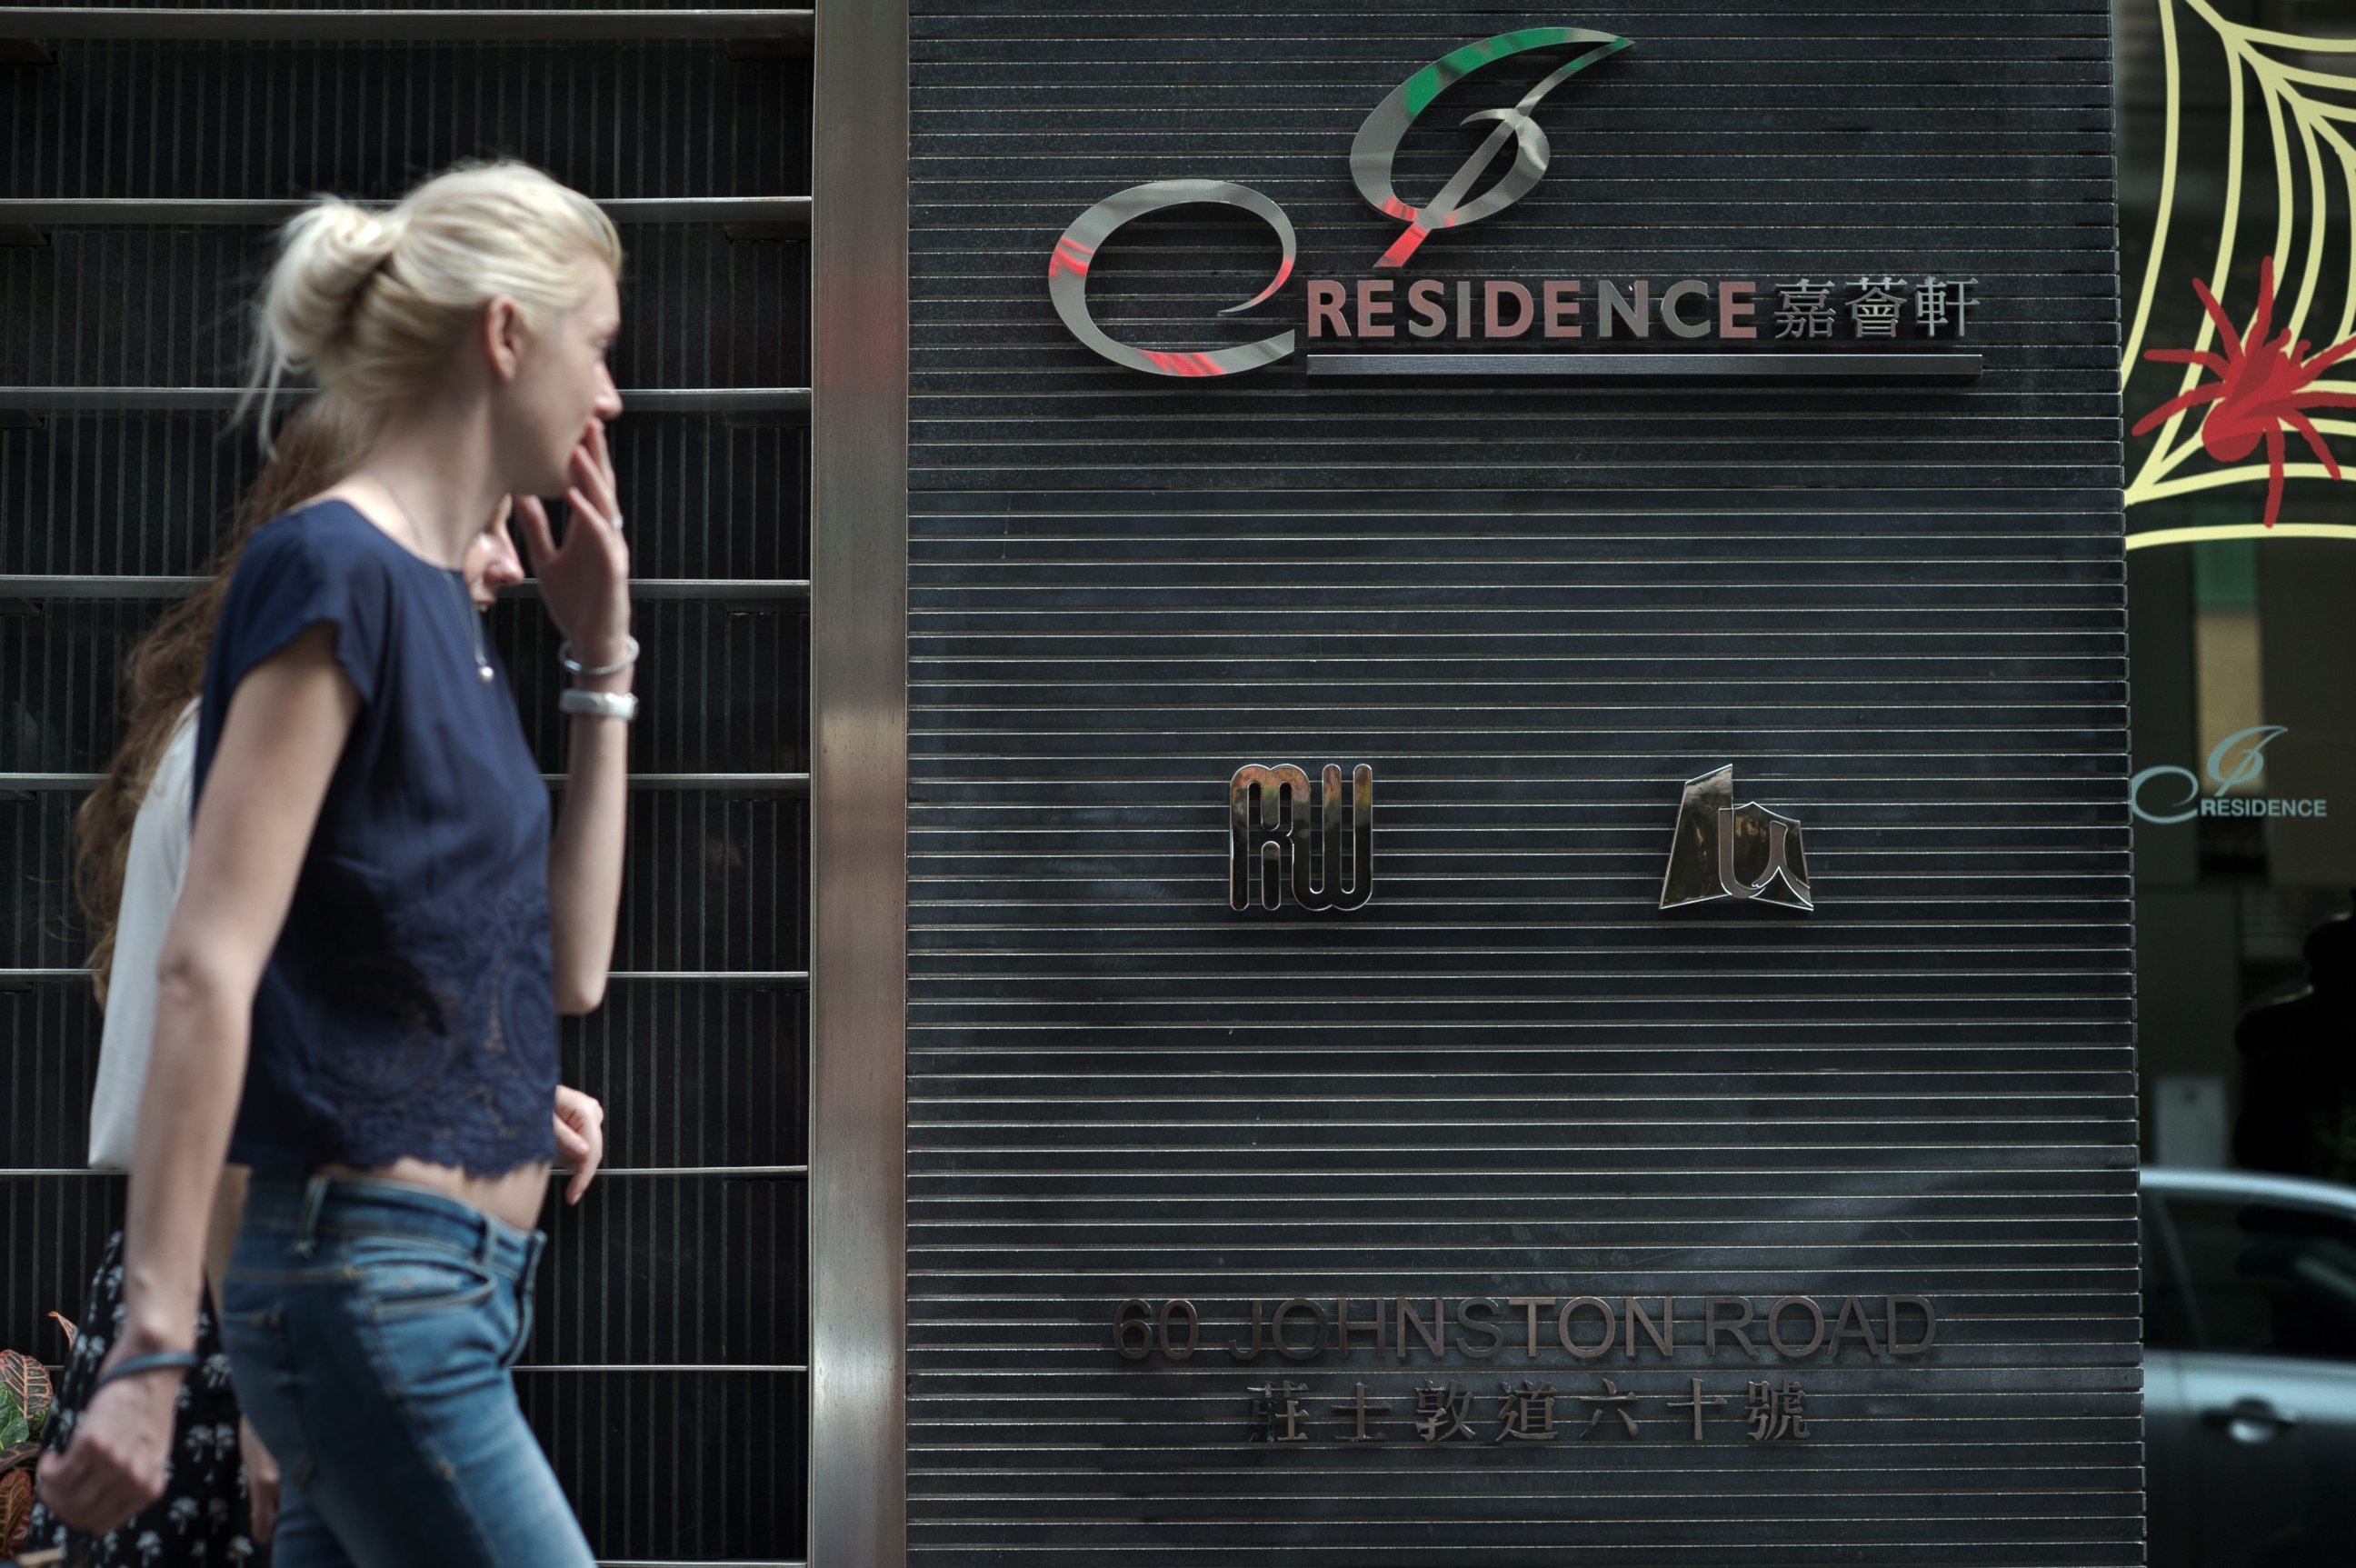 PHOTO: Pedestrians walk in front of the J Residence building front entrance in Hong Kong on Nov. 2, 2014.